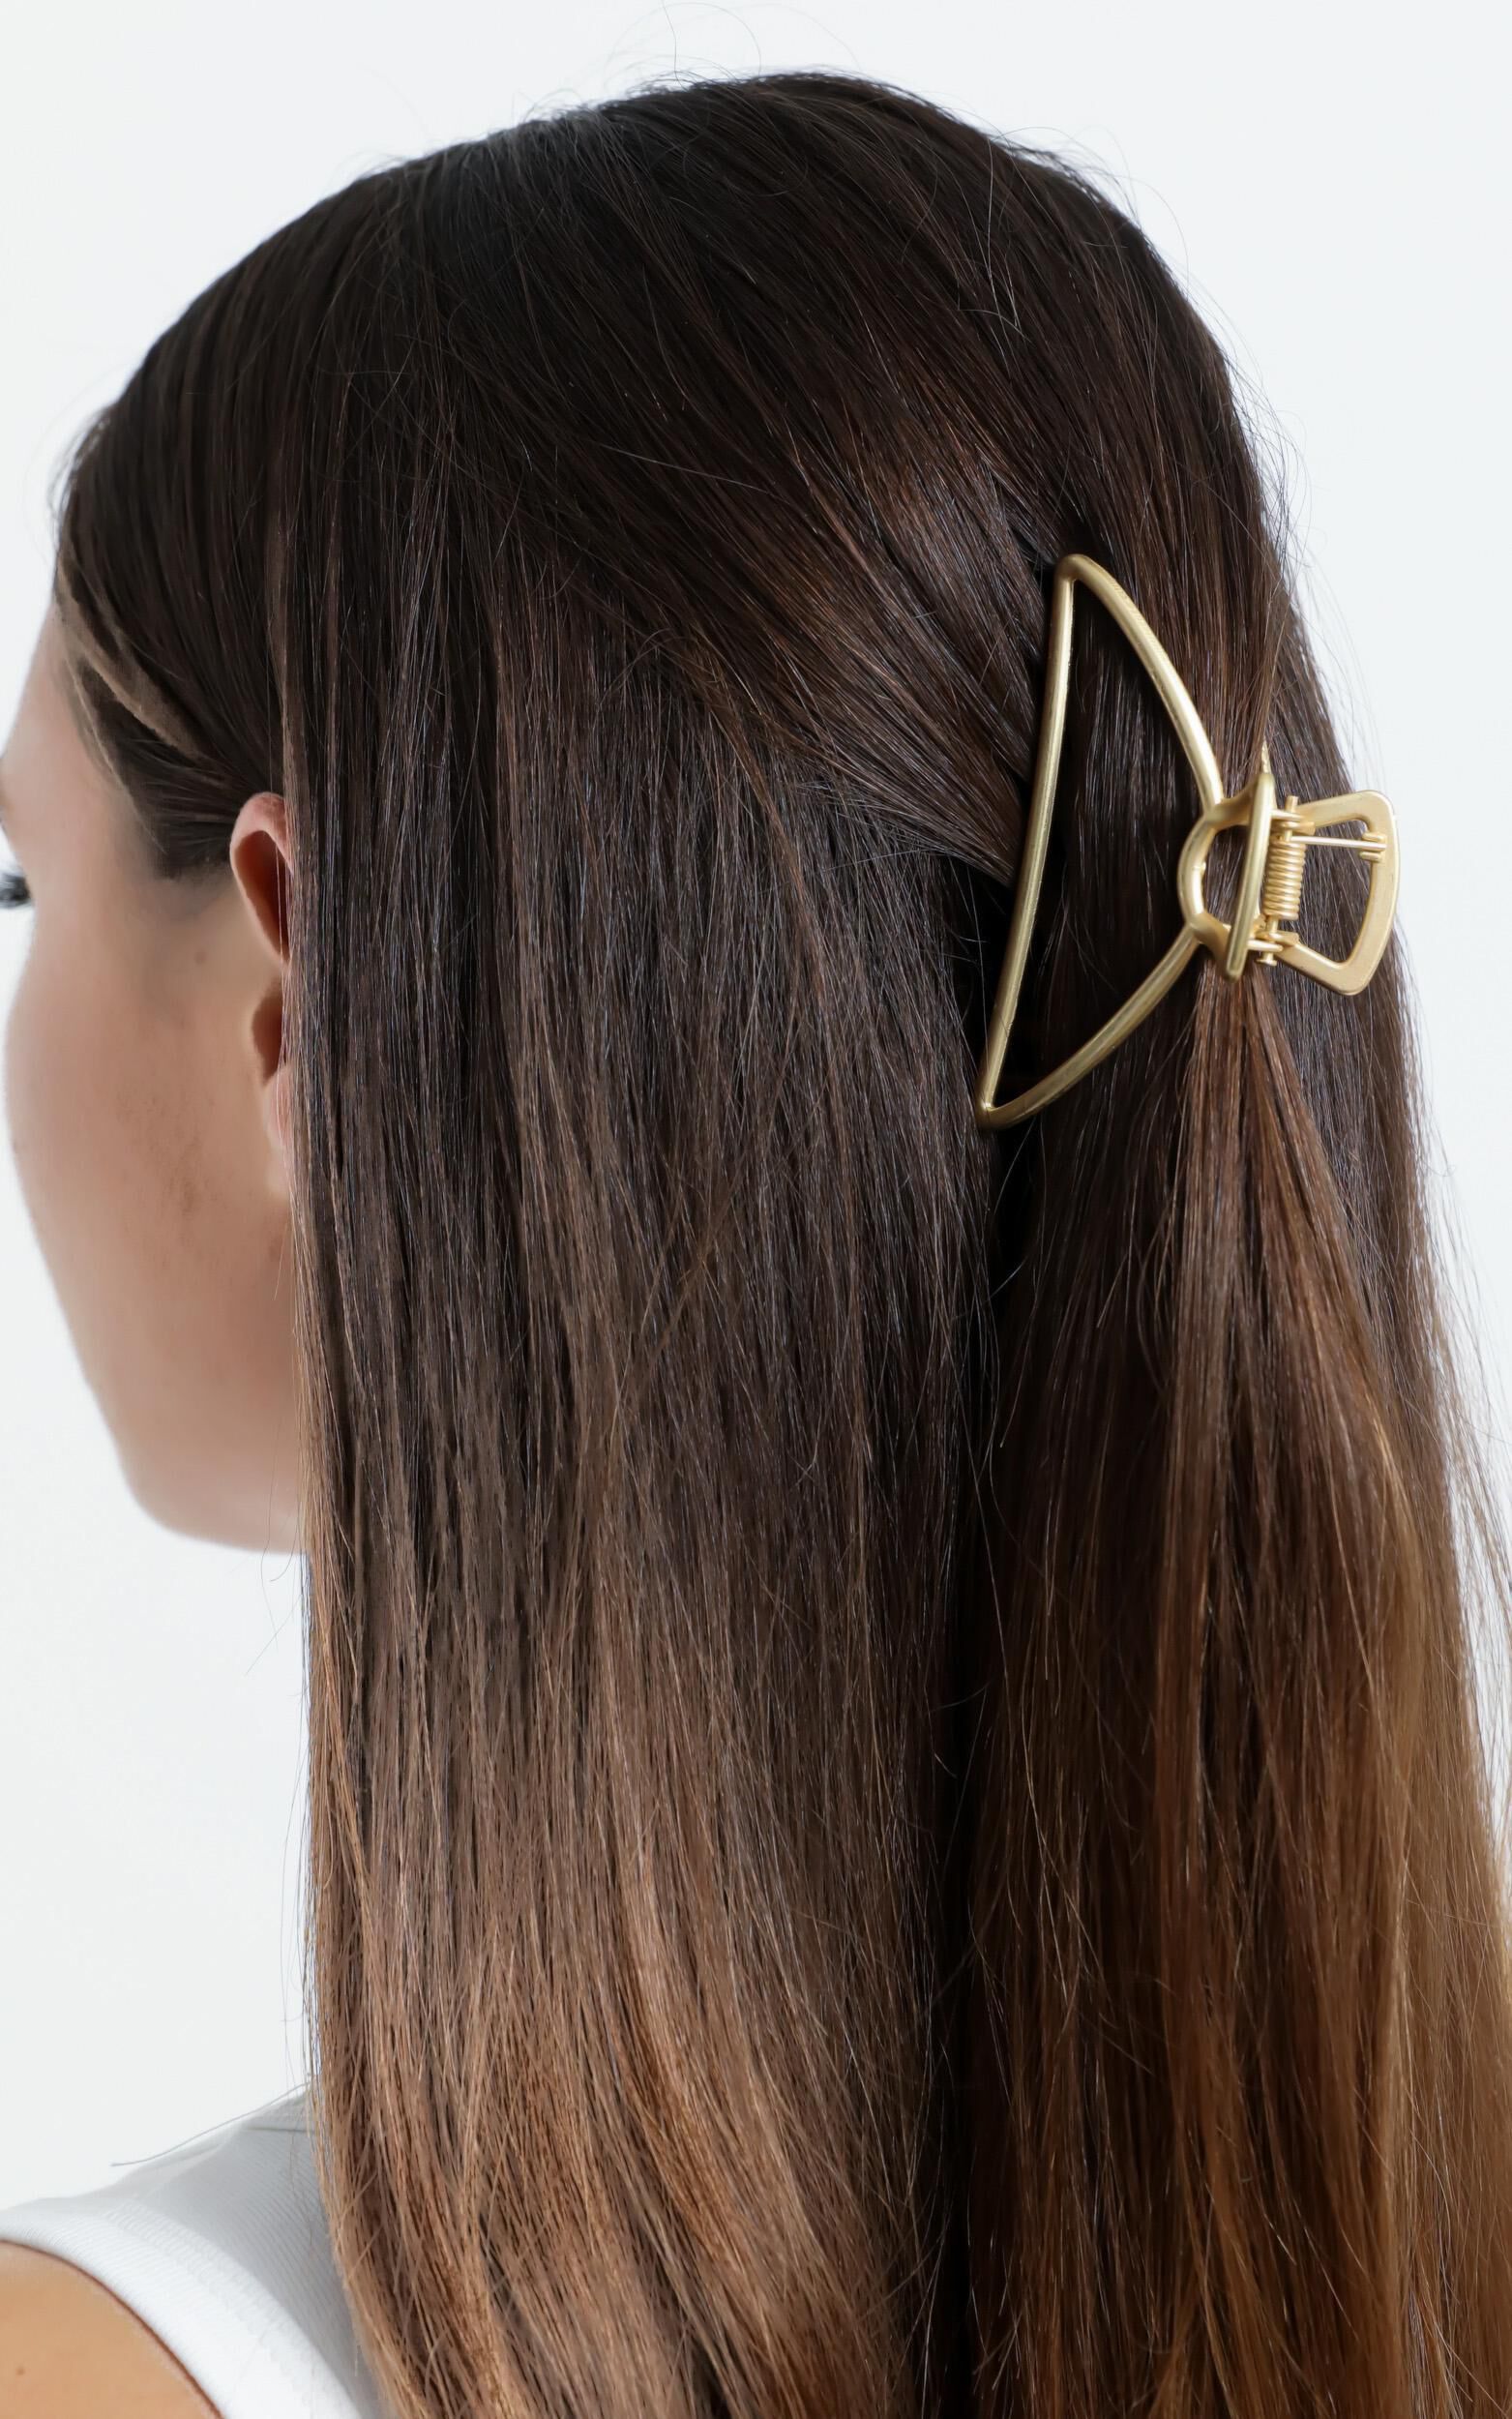 The Day Time Hair Clip in Gold, 